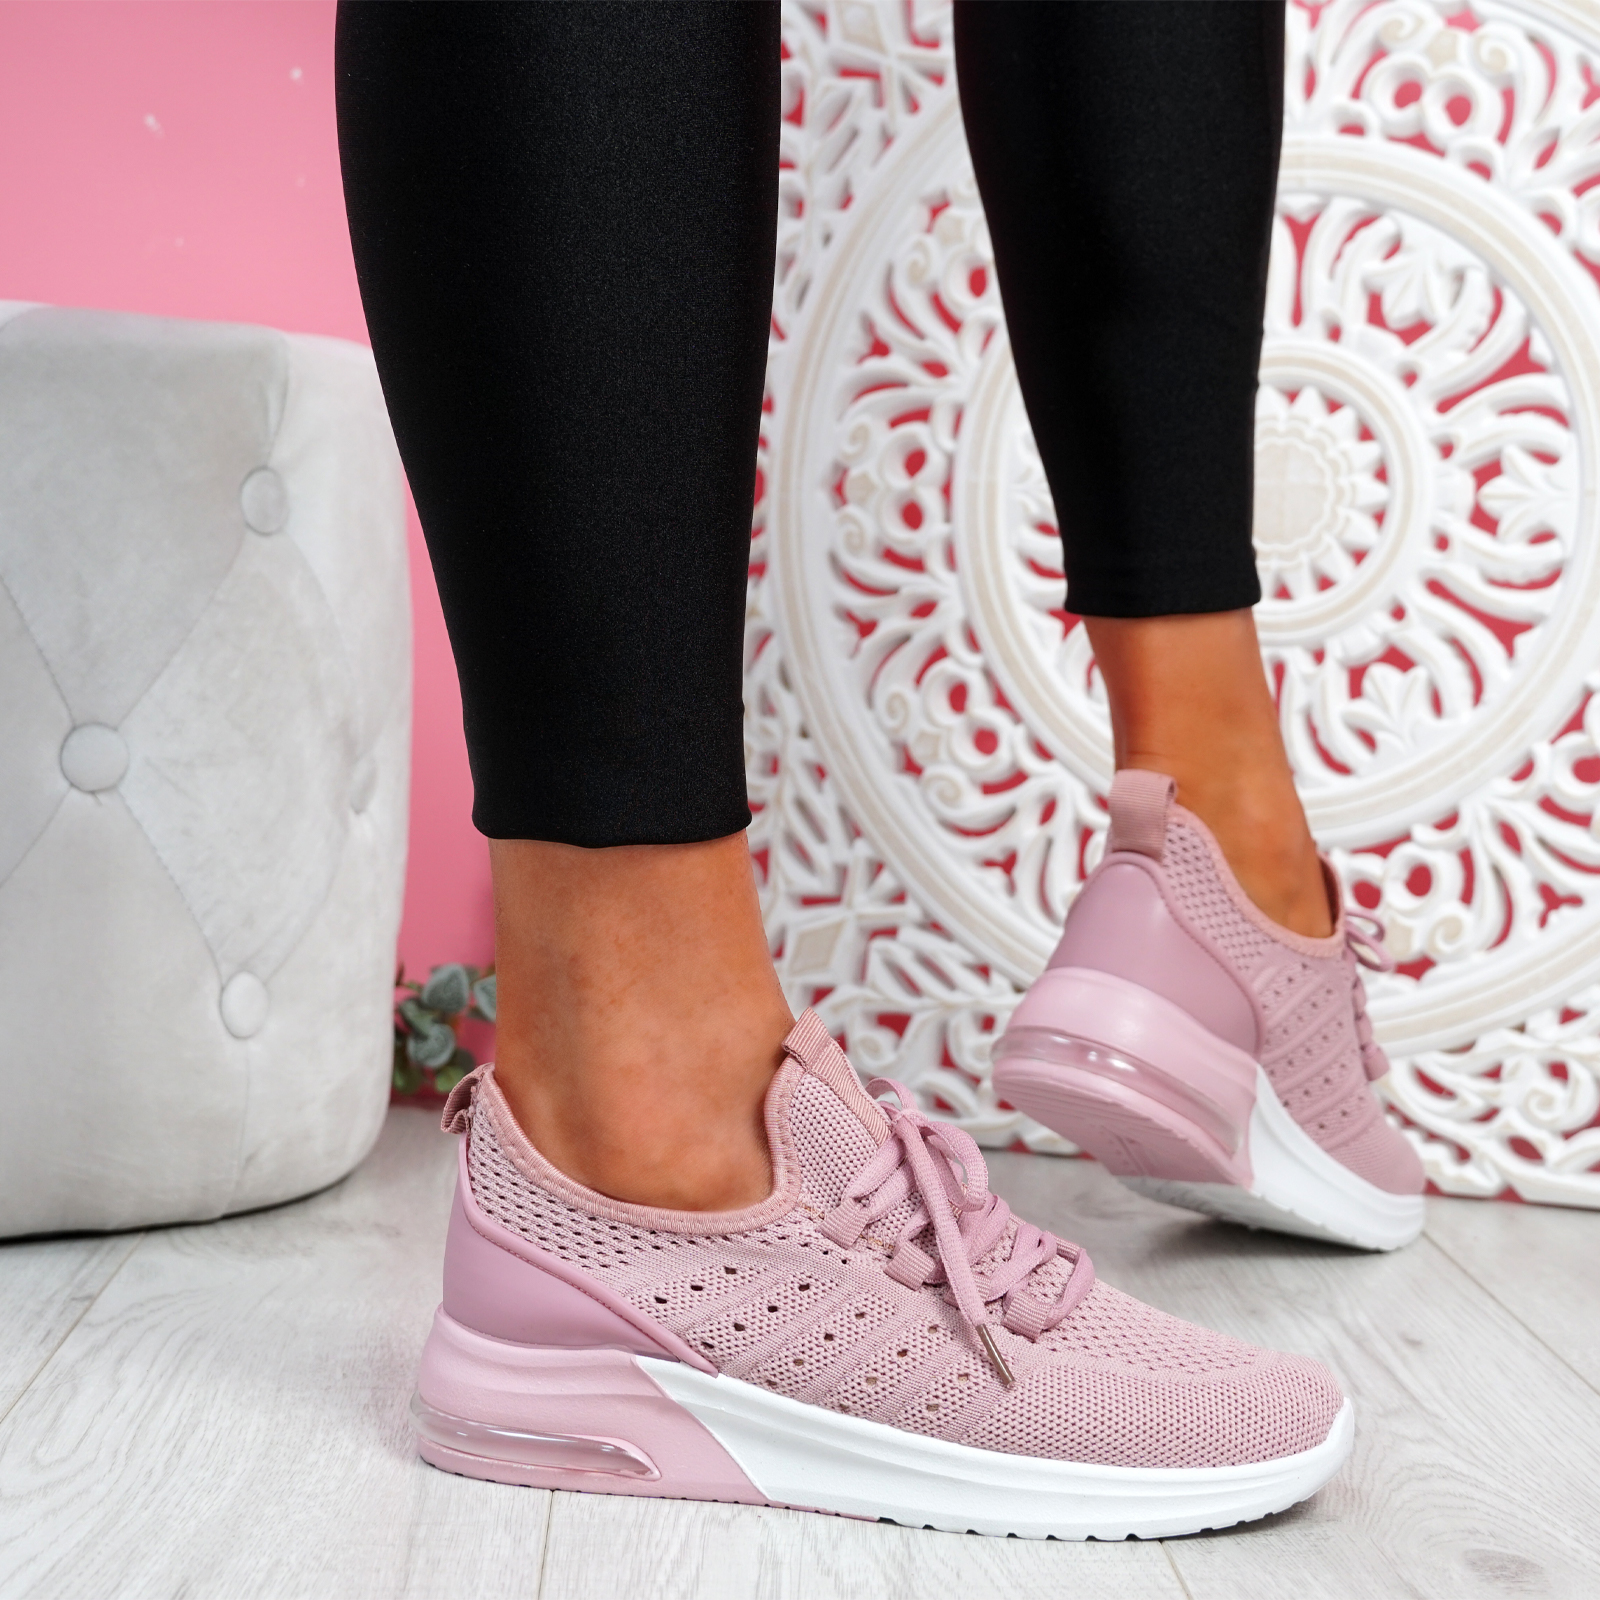 WOMENS LADIES KNIT LACE TRAINERS SPORT SNEAKERS RUNNING WOMEN SHOES ...